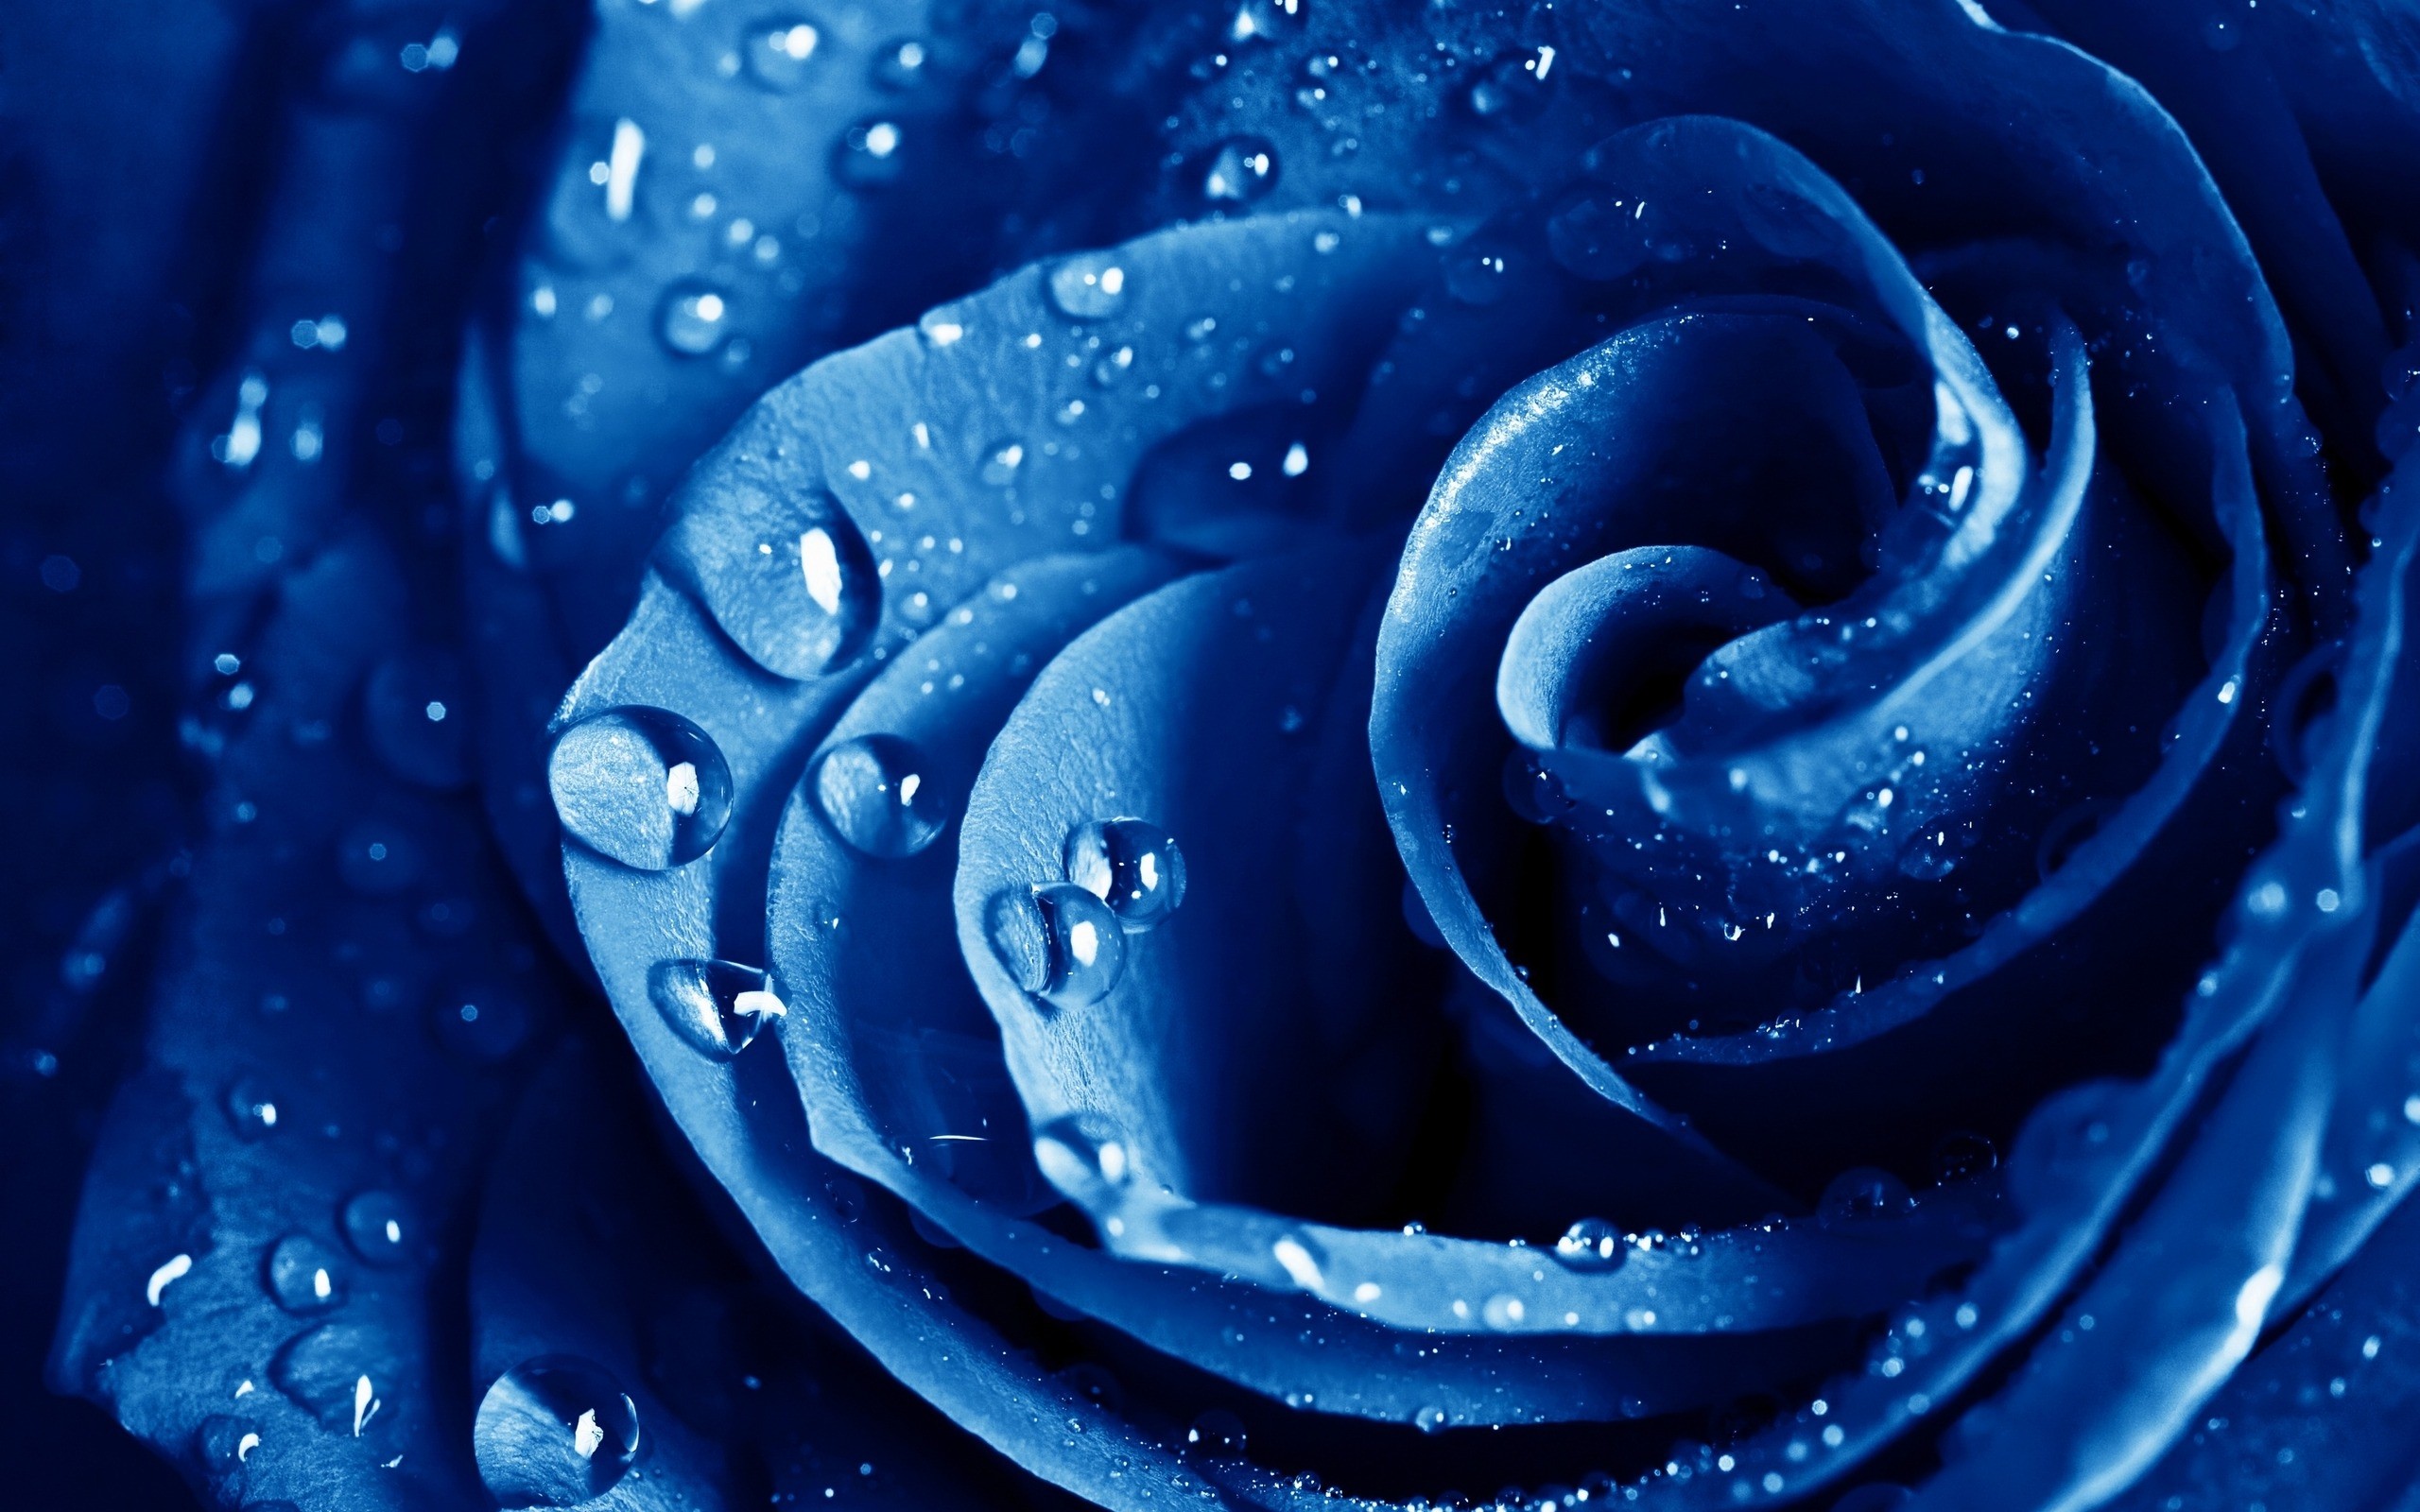  2015 By Stephen Comments Off on Blue Water Drops Wallpapers